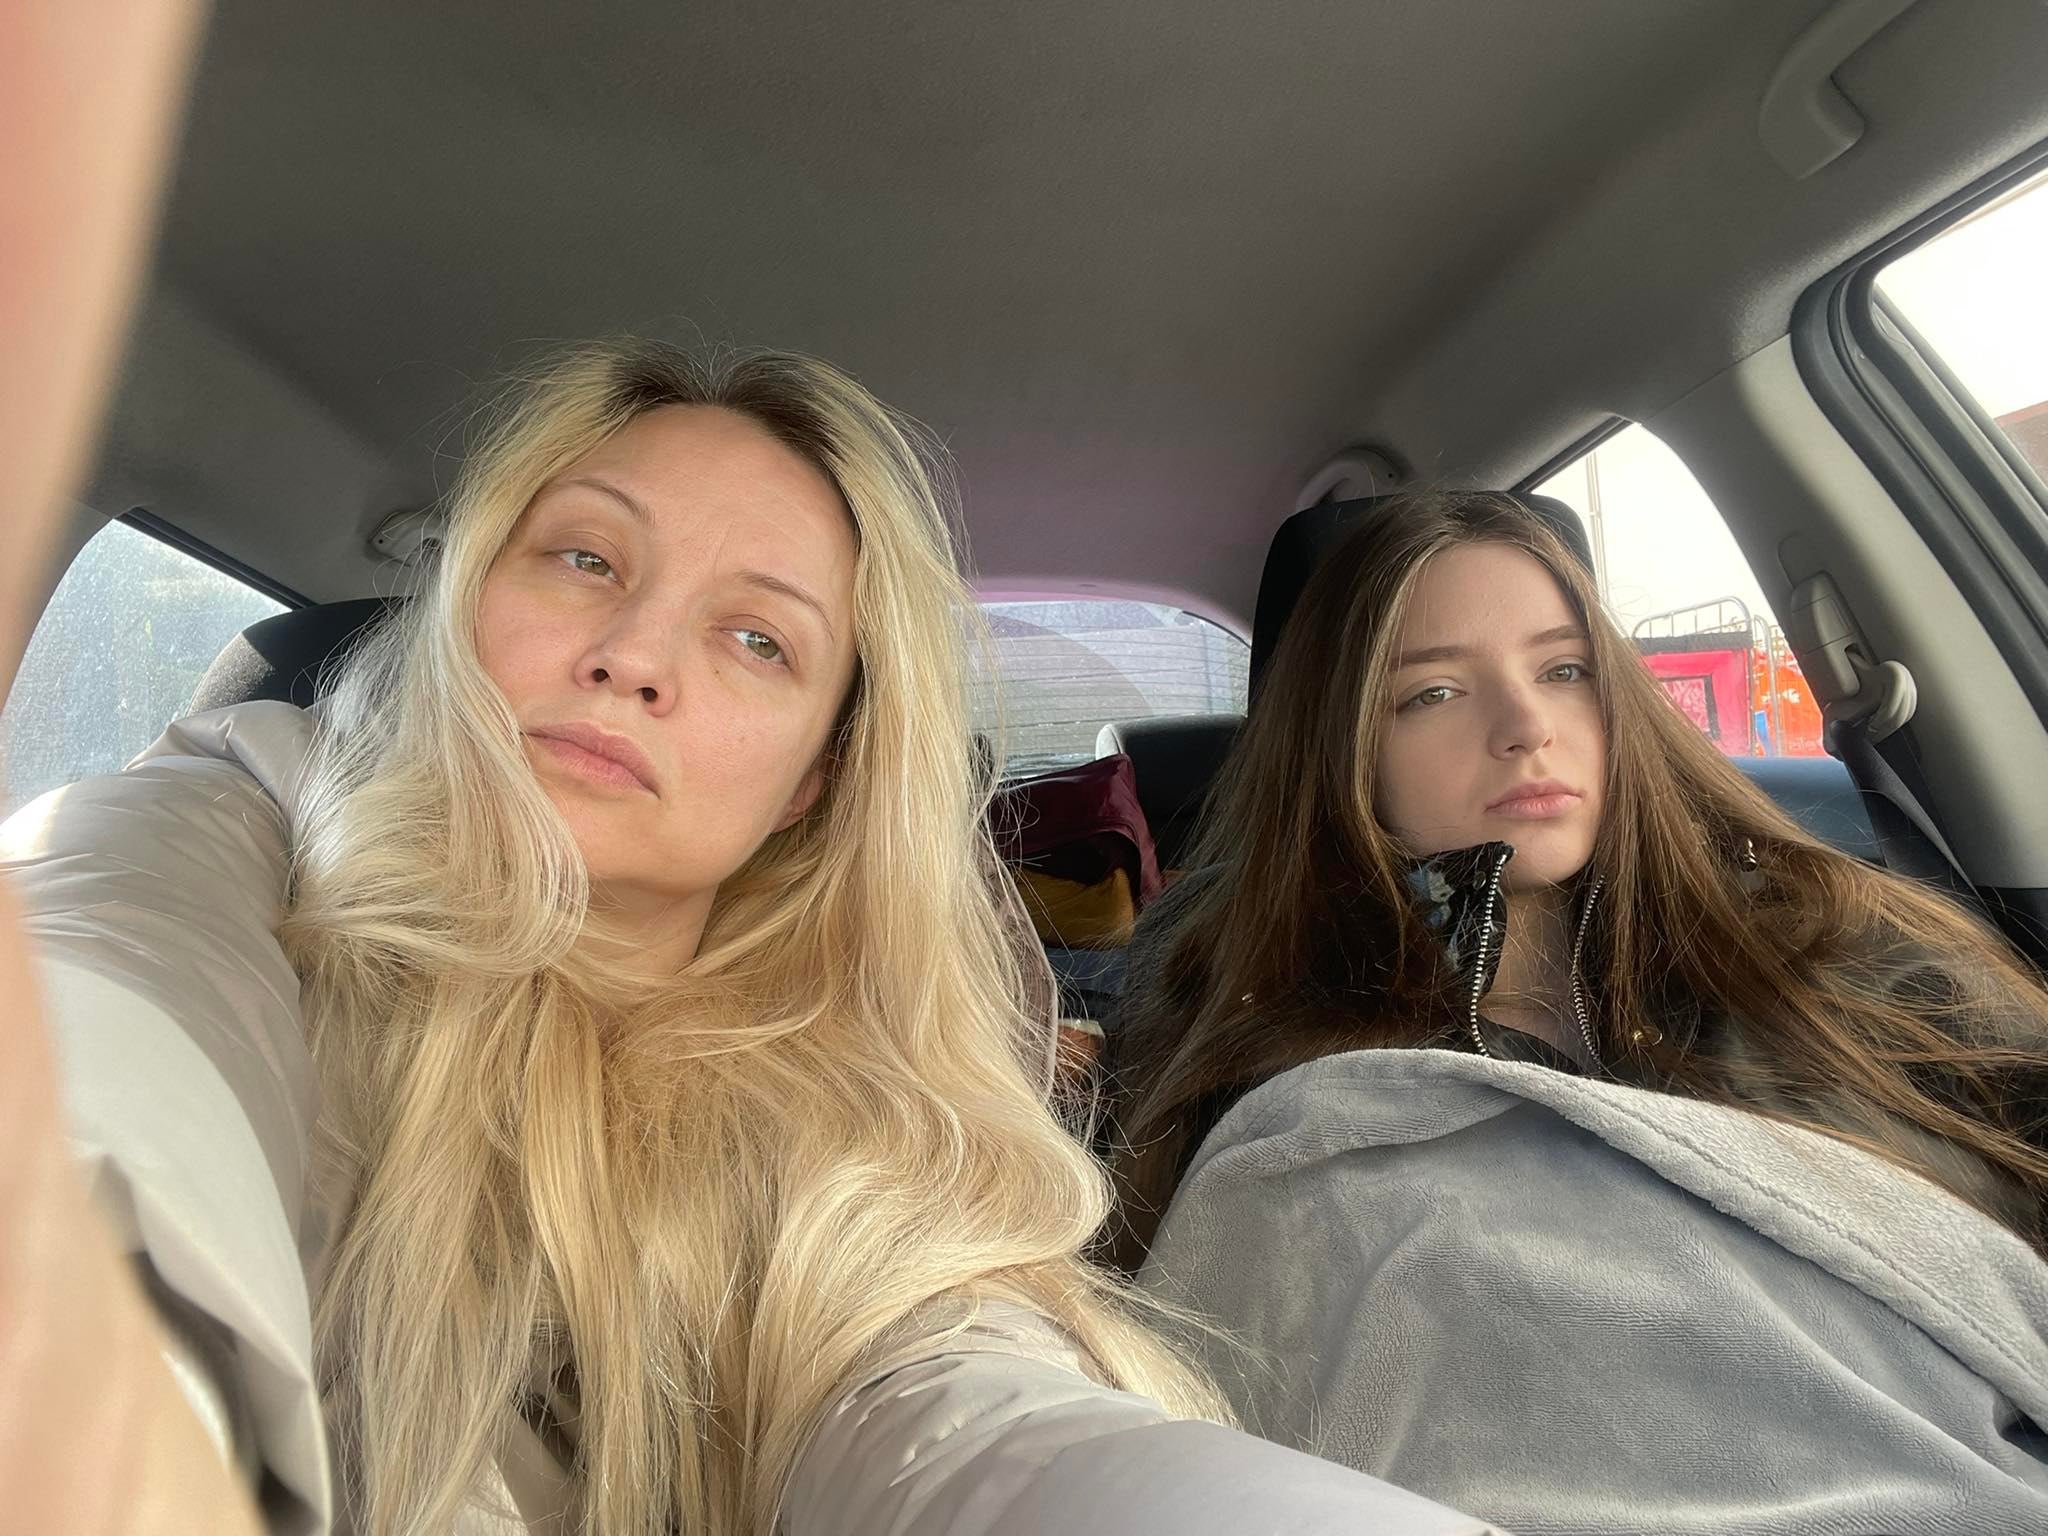 Alena Semenova, 22, (right) and Tetyana Tsybanyuk, 40, from Kyiv who are stuck in their in France after being refused entry to the UK (Family handout/PA)